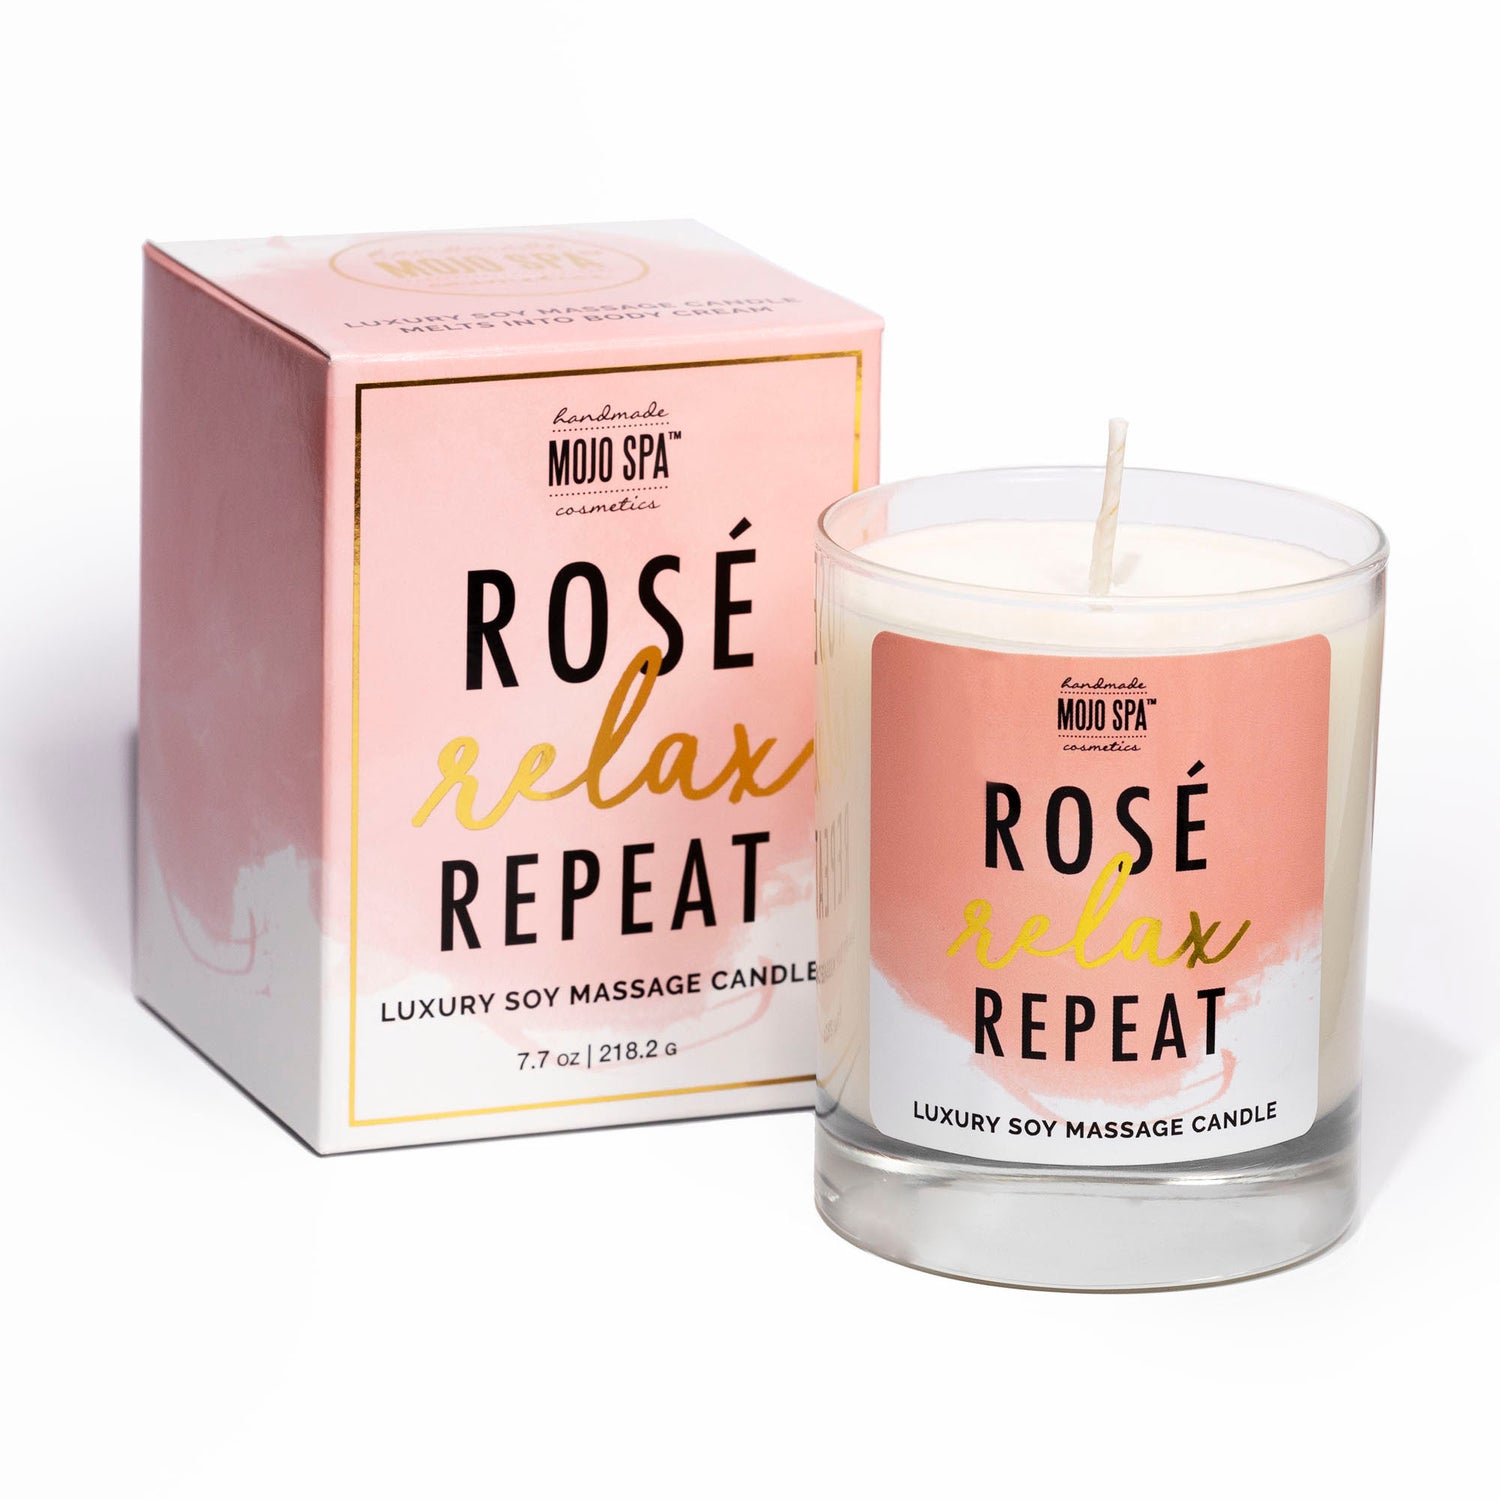 Rosé. Relax. Repeat. Luxury Soy Massage Candle